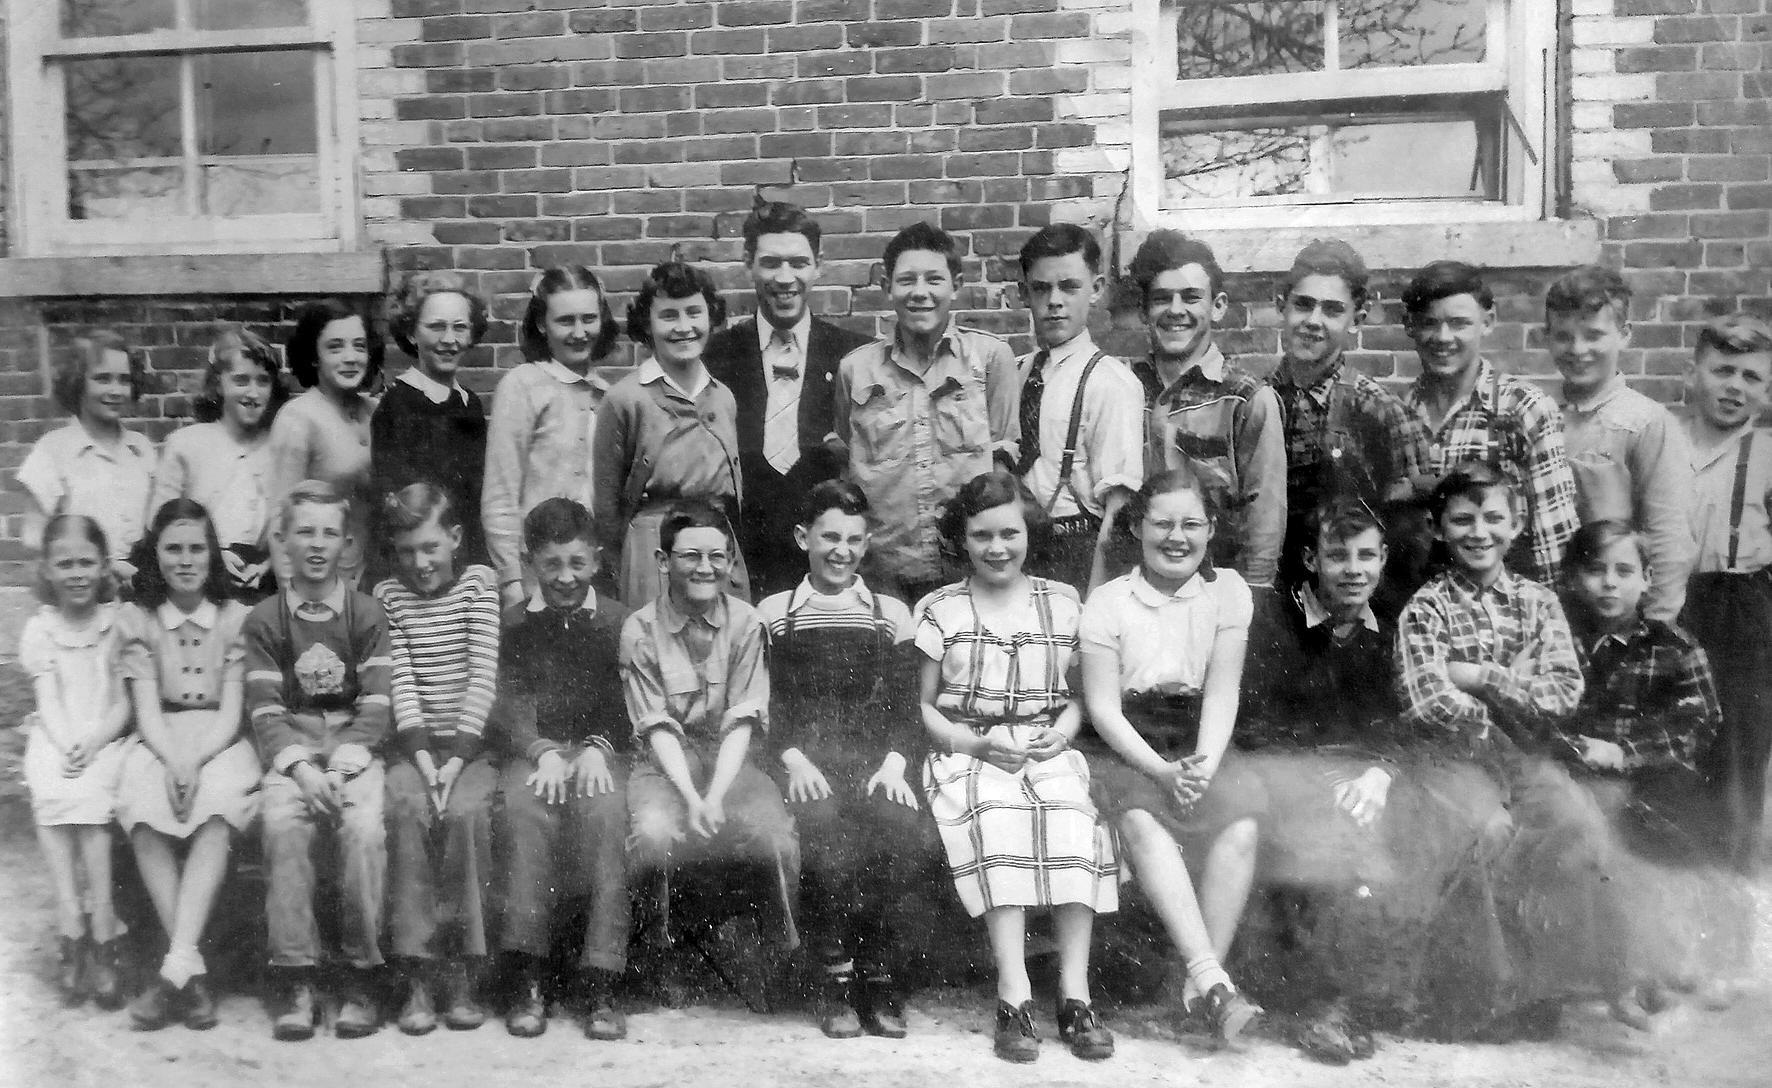 Photograph of school class in Frankville, Ontario, about 1951-52